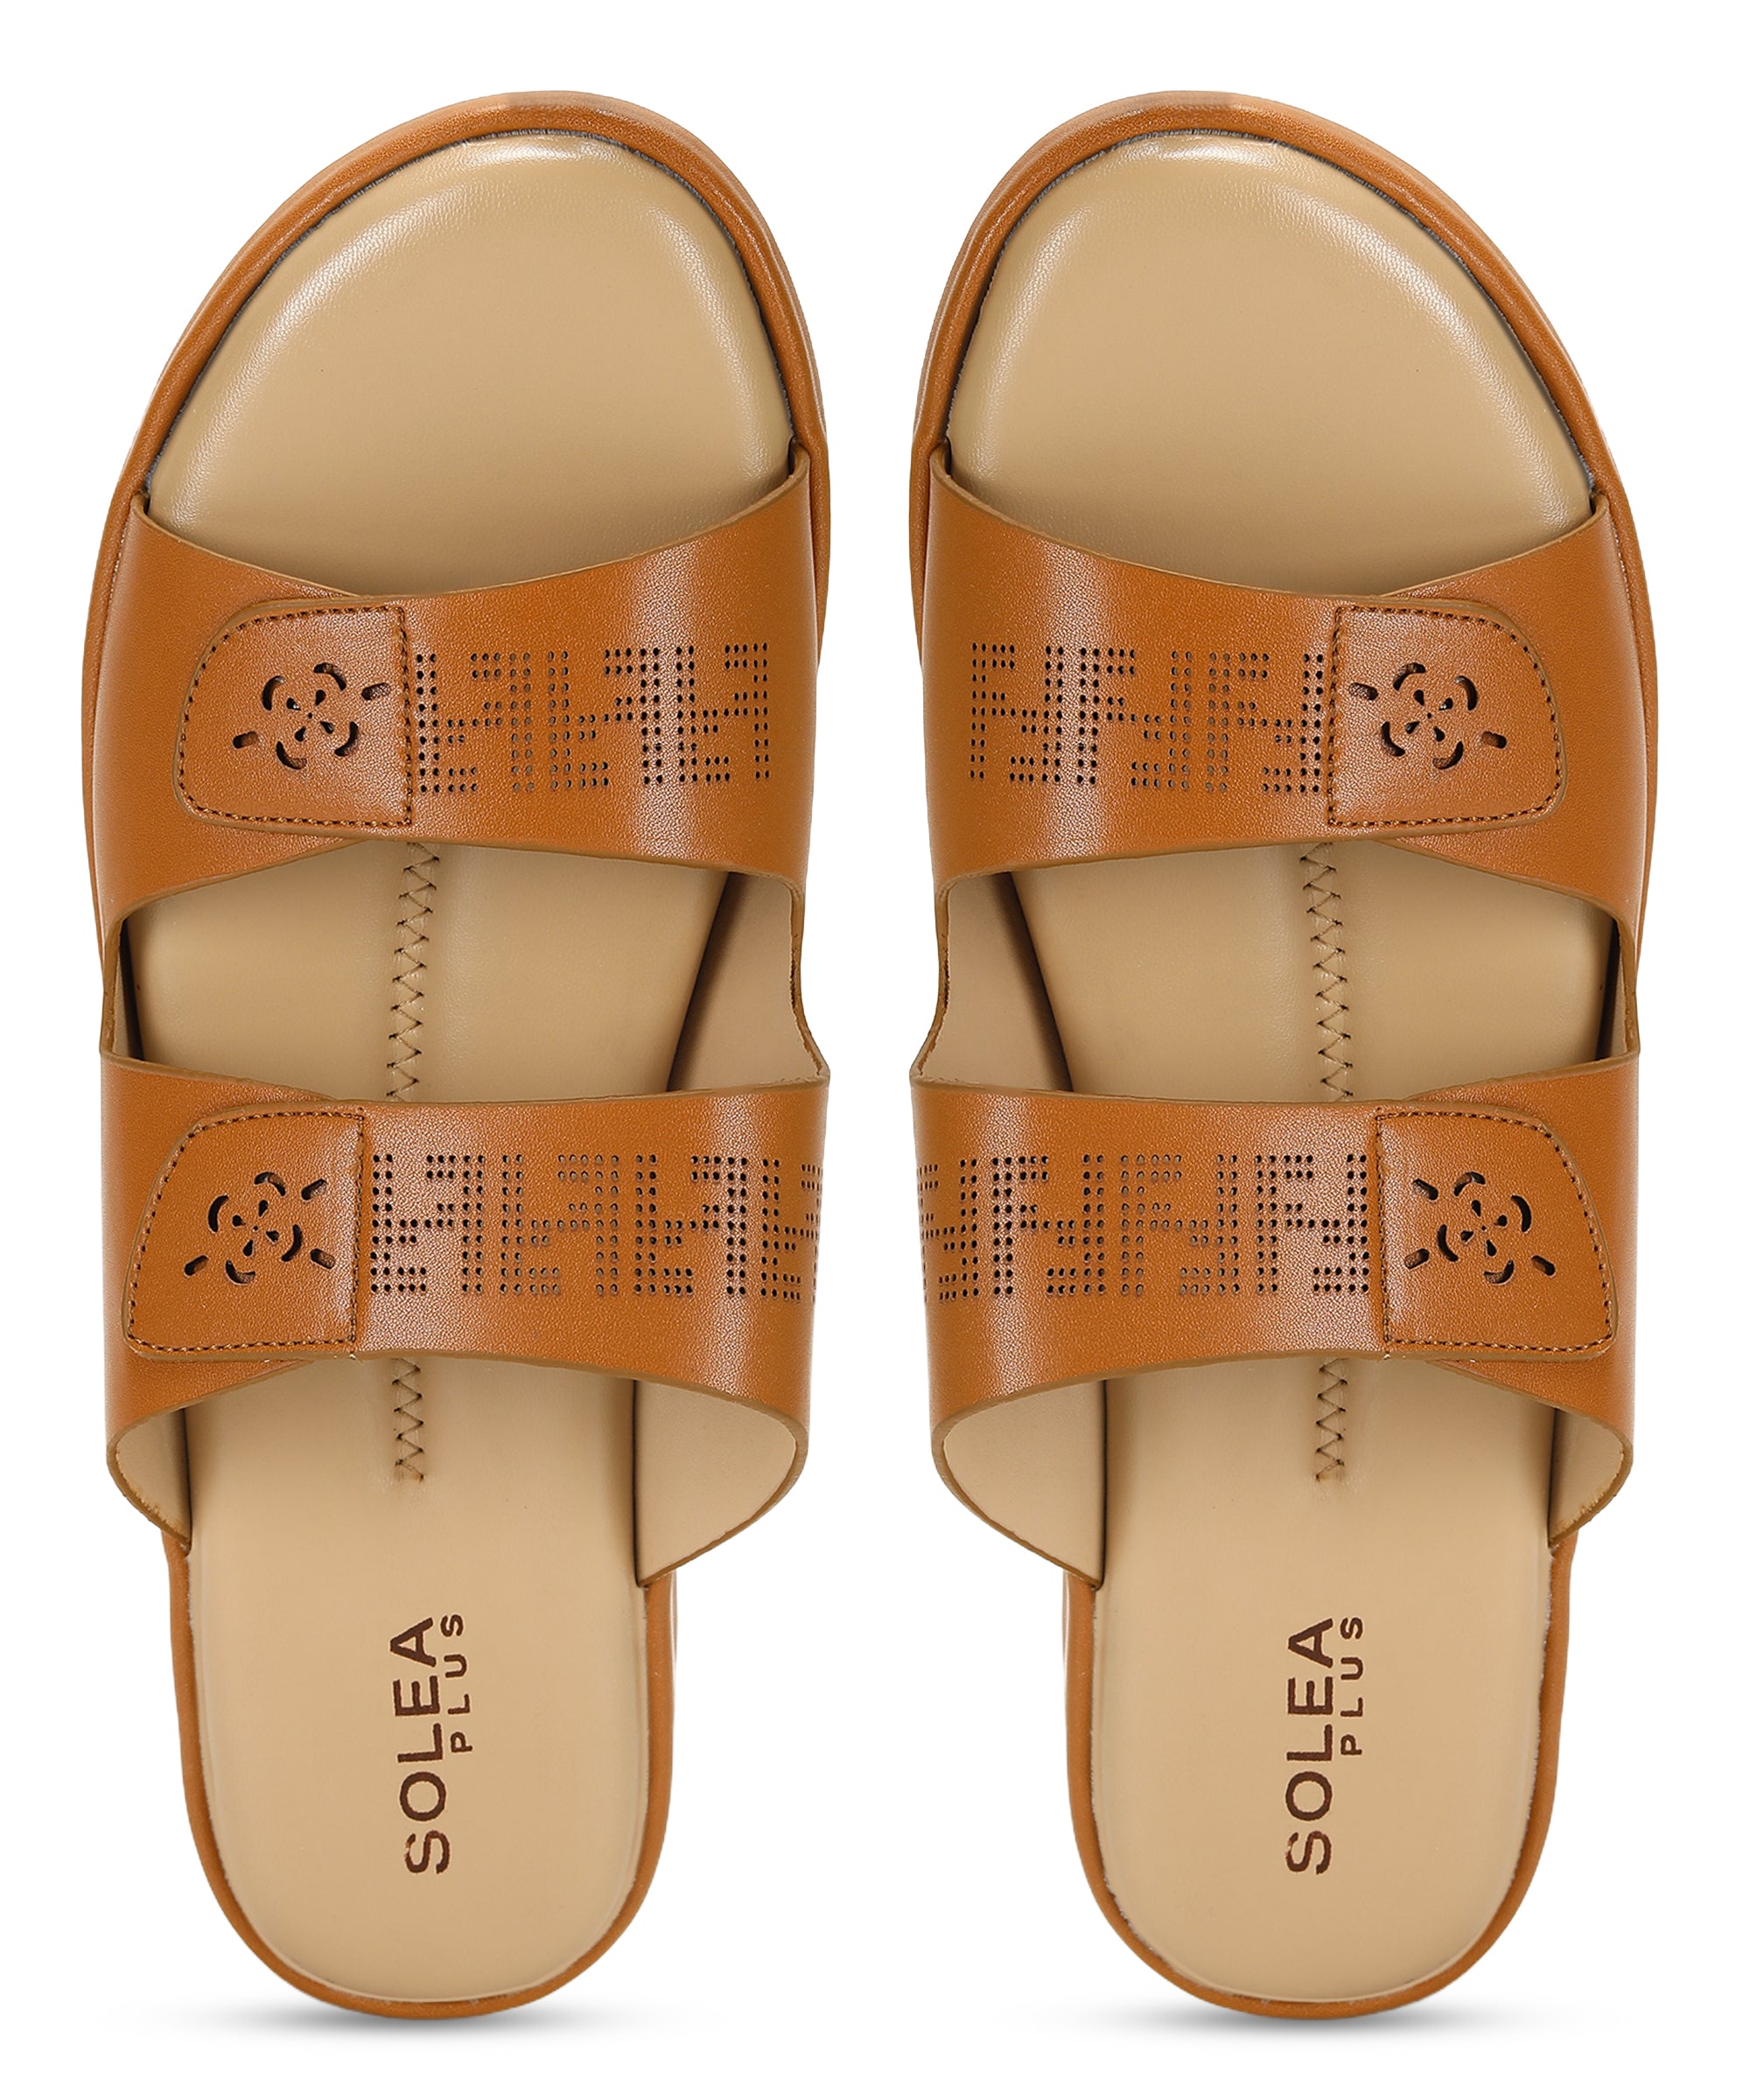 Paragon RK6028L Women Sandals | Casual &amp; Formal Sandals | Stylish, Comfortable &amp; Durable | For Daily &amp; Occasion Wear